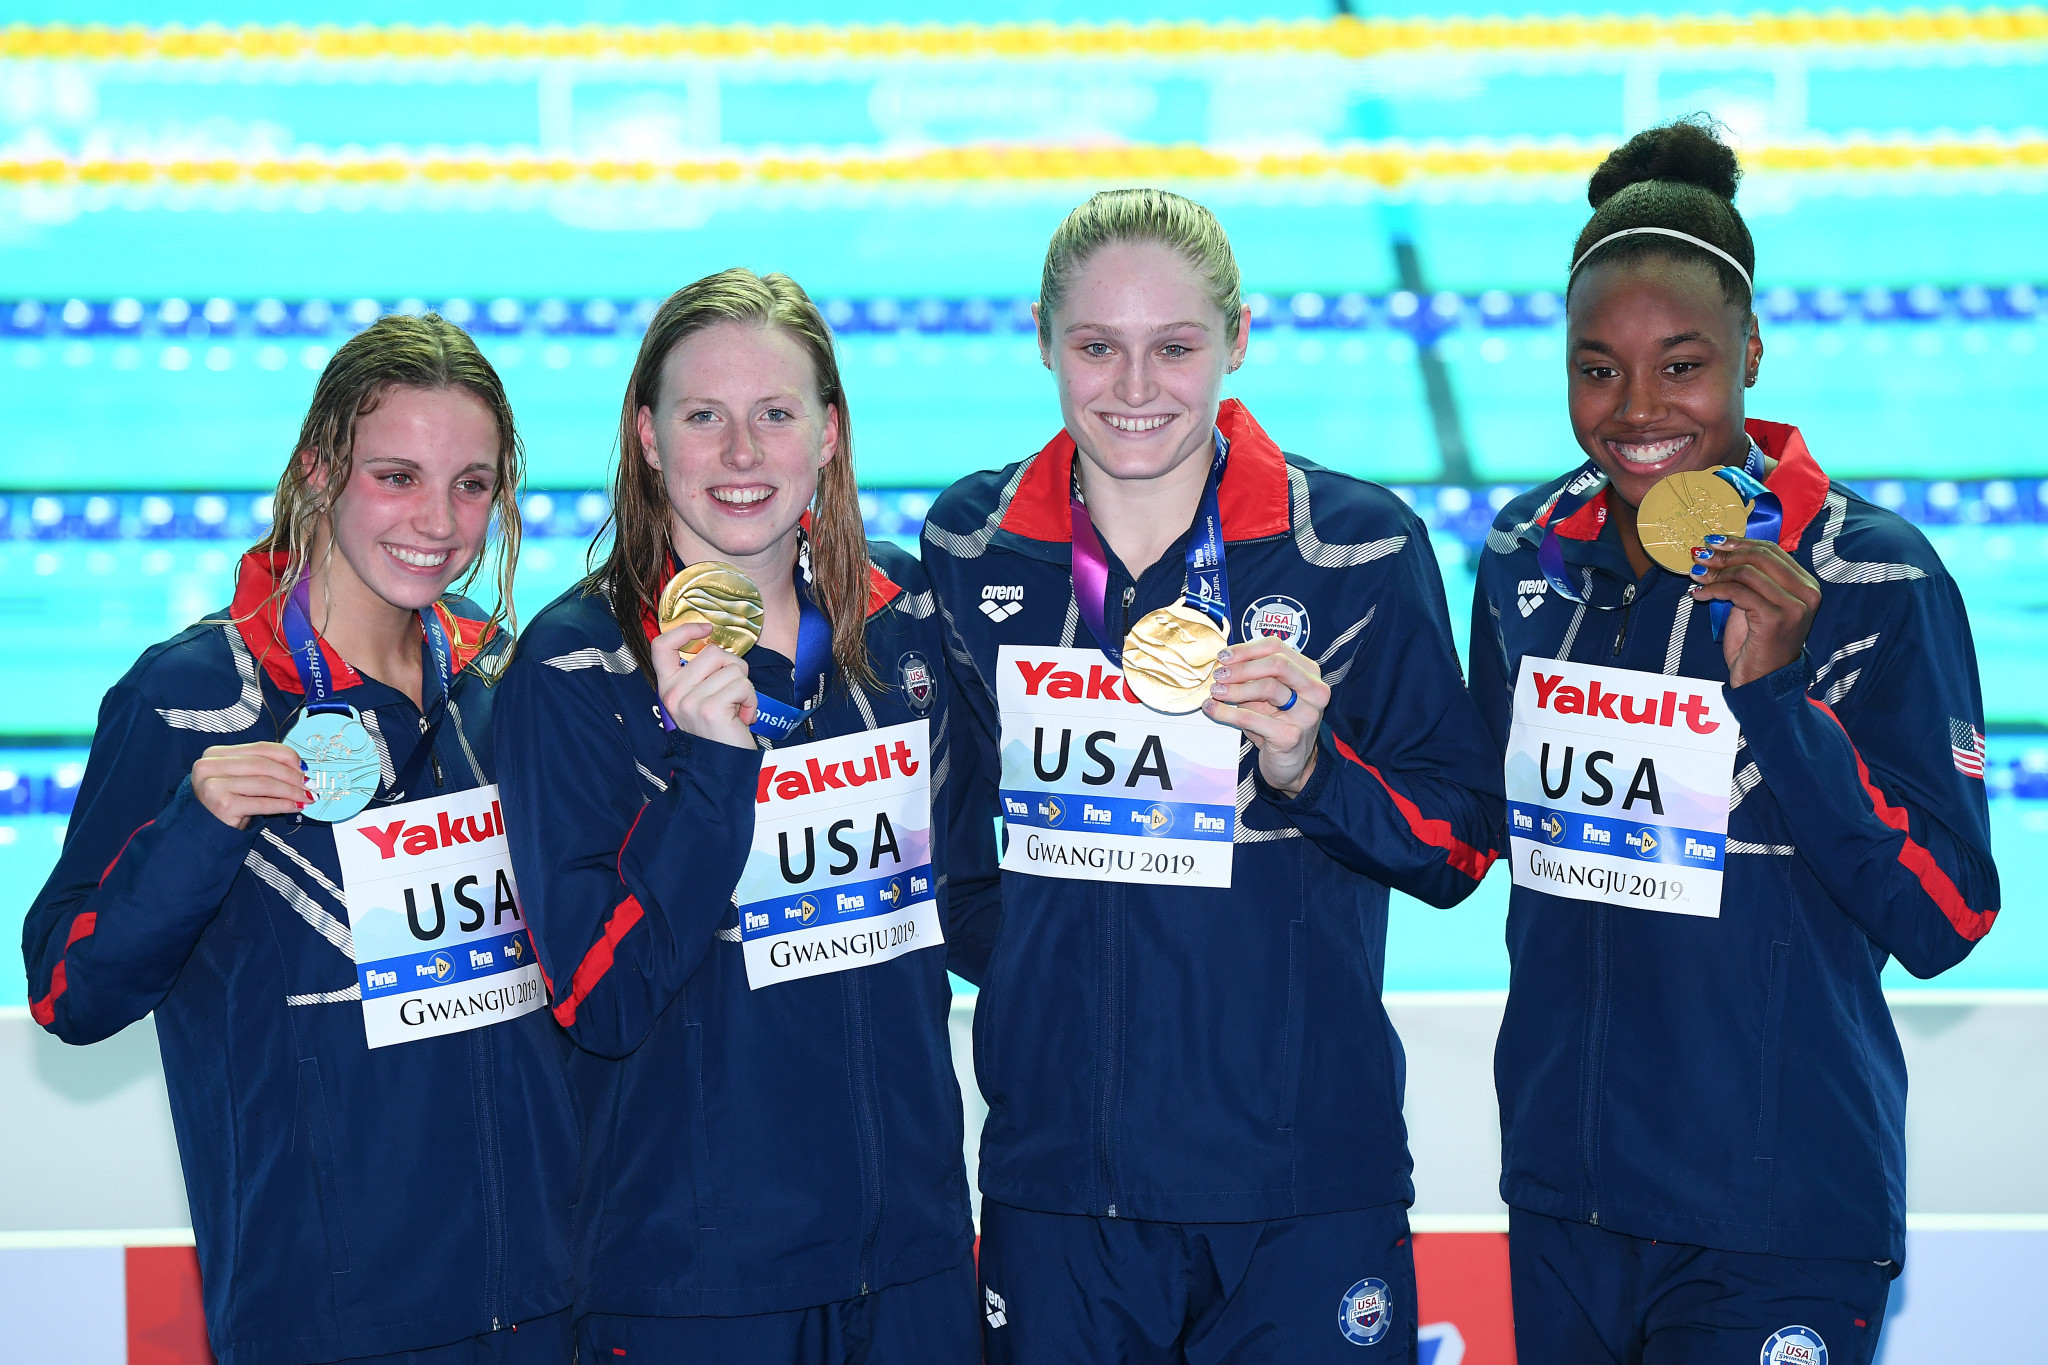 United States have topped the medal table at the 2019 FINA World Aquatics Championships ©Getty Images